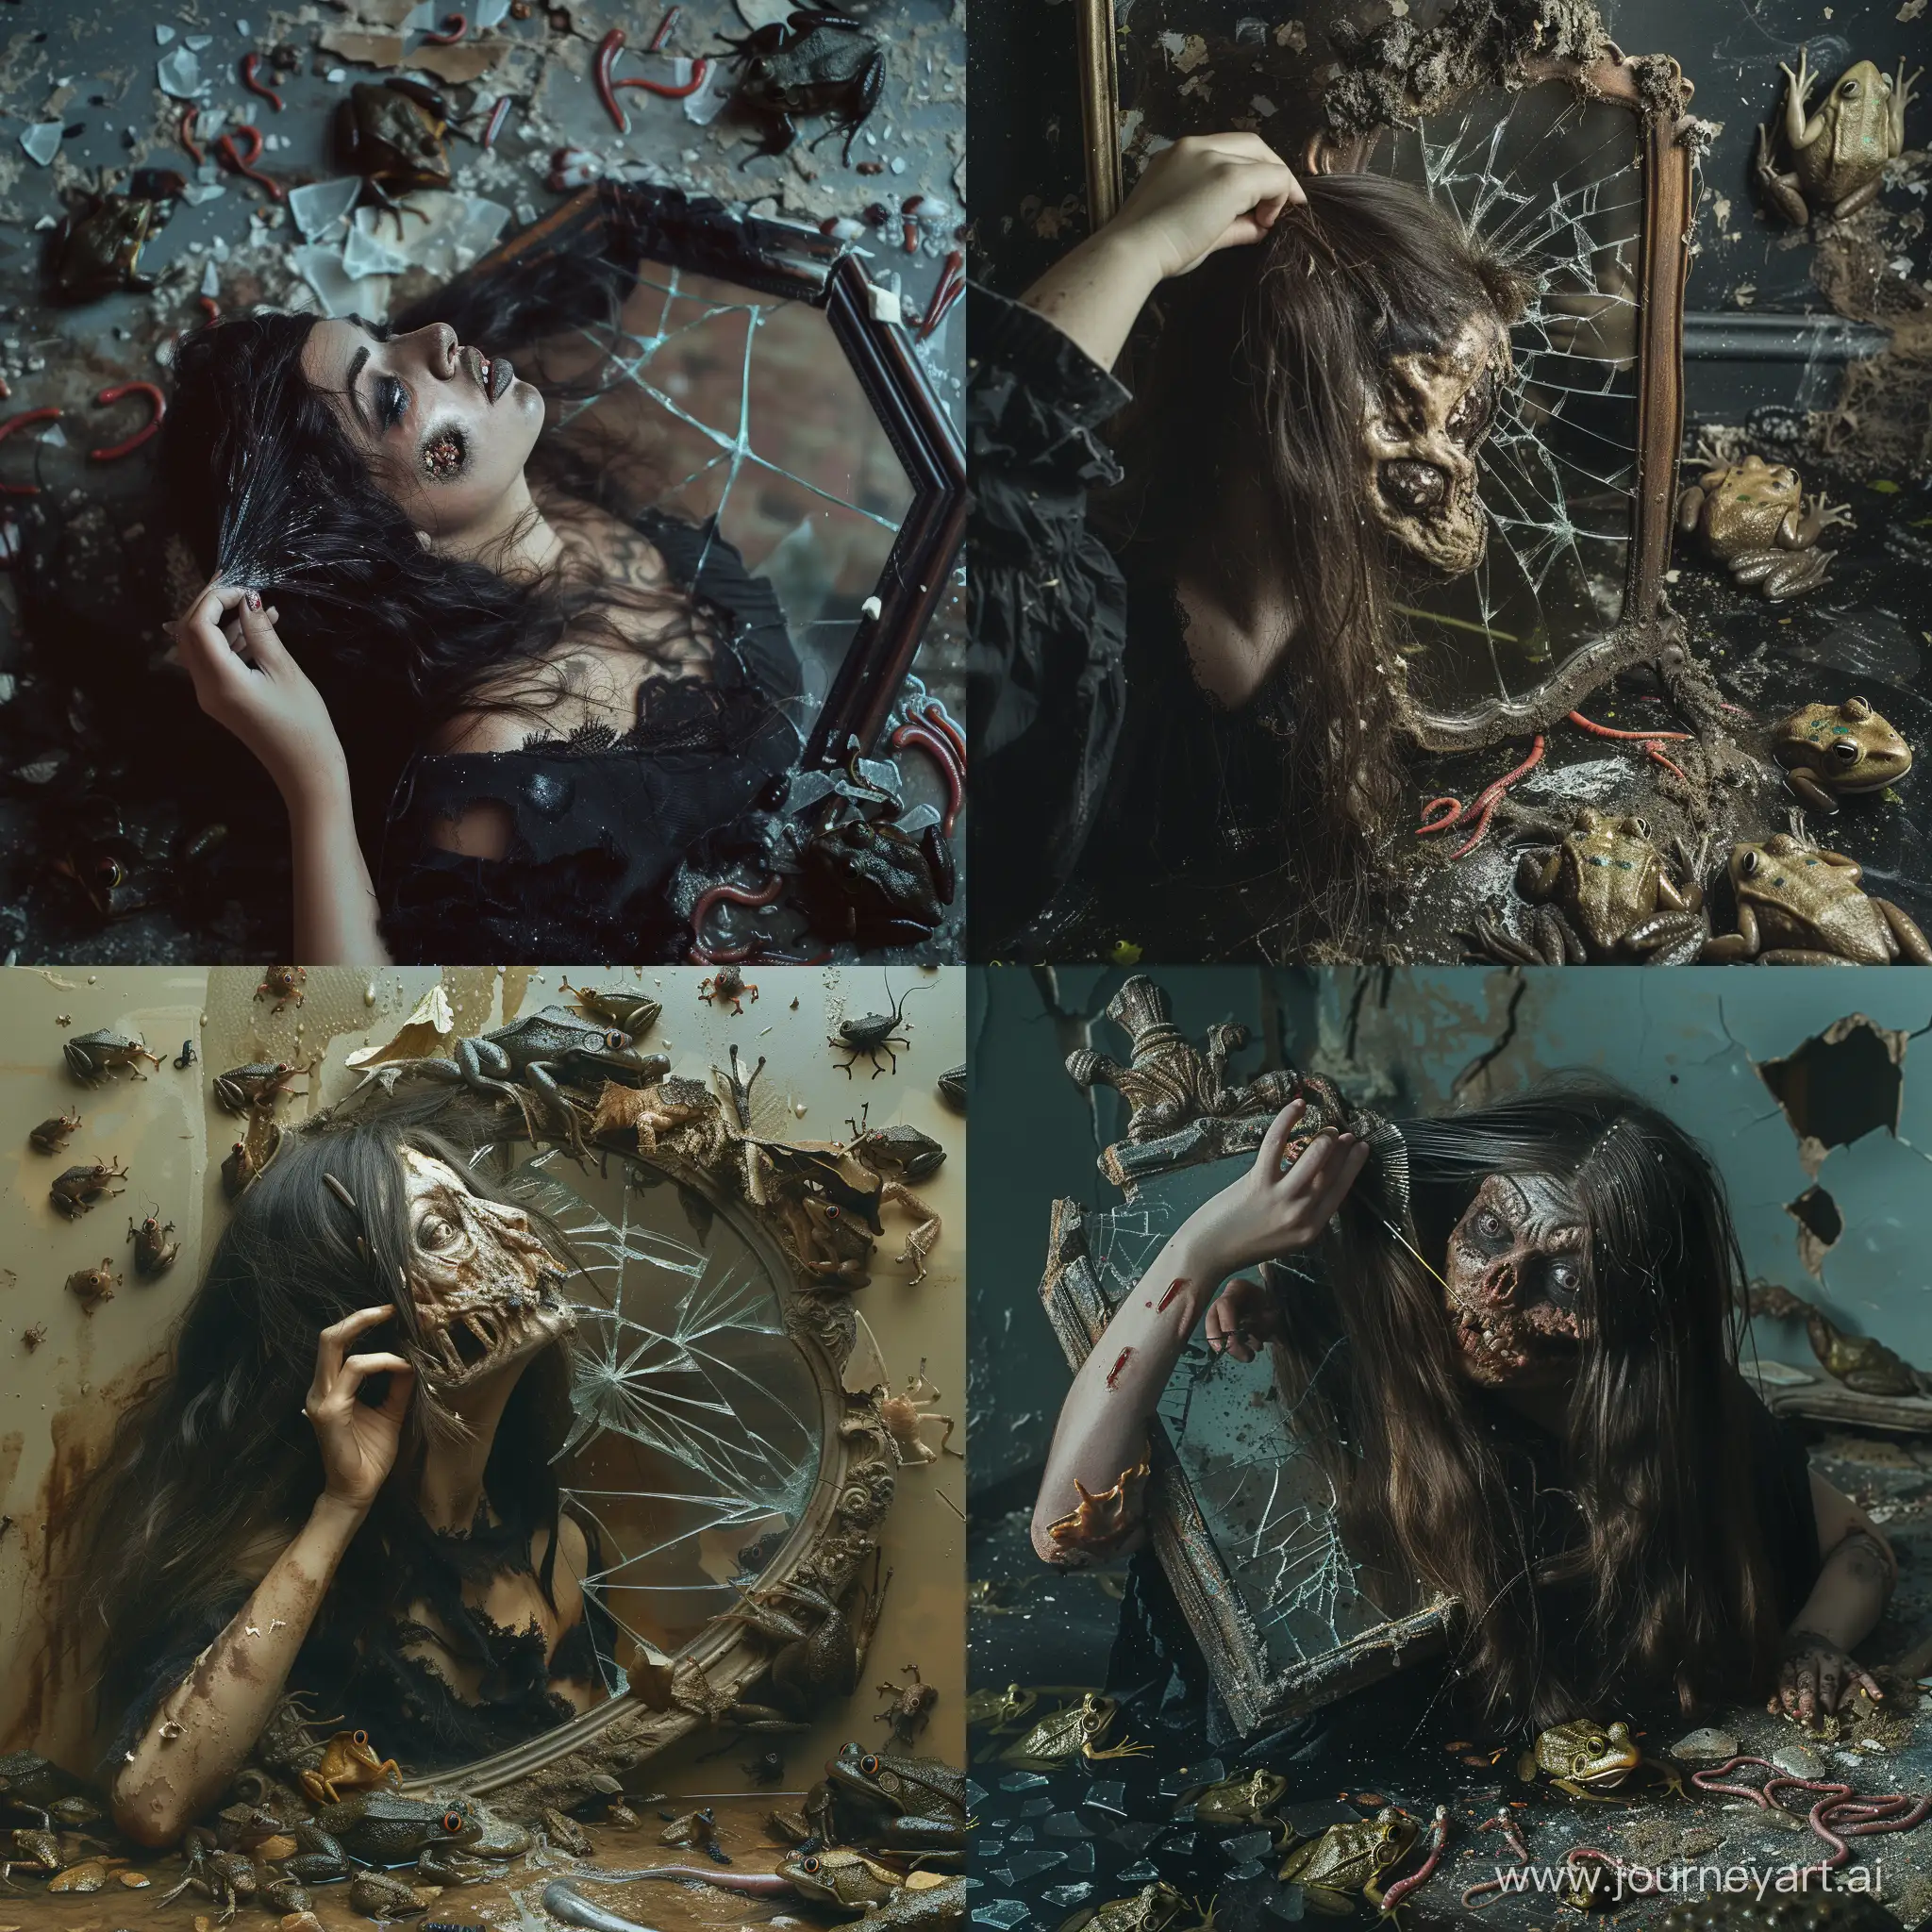 Creepy rotten face ugly woman brushing her hair against shattered mirror. Haunted room. there is frogs and worms around the room. The woman is wearing black ragged clothes. Cinematic shot. Realistic image.